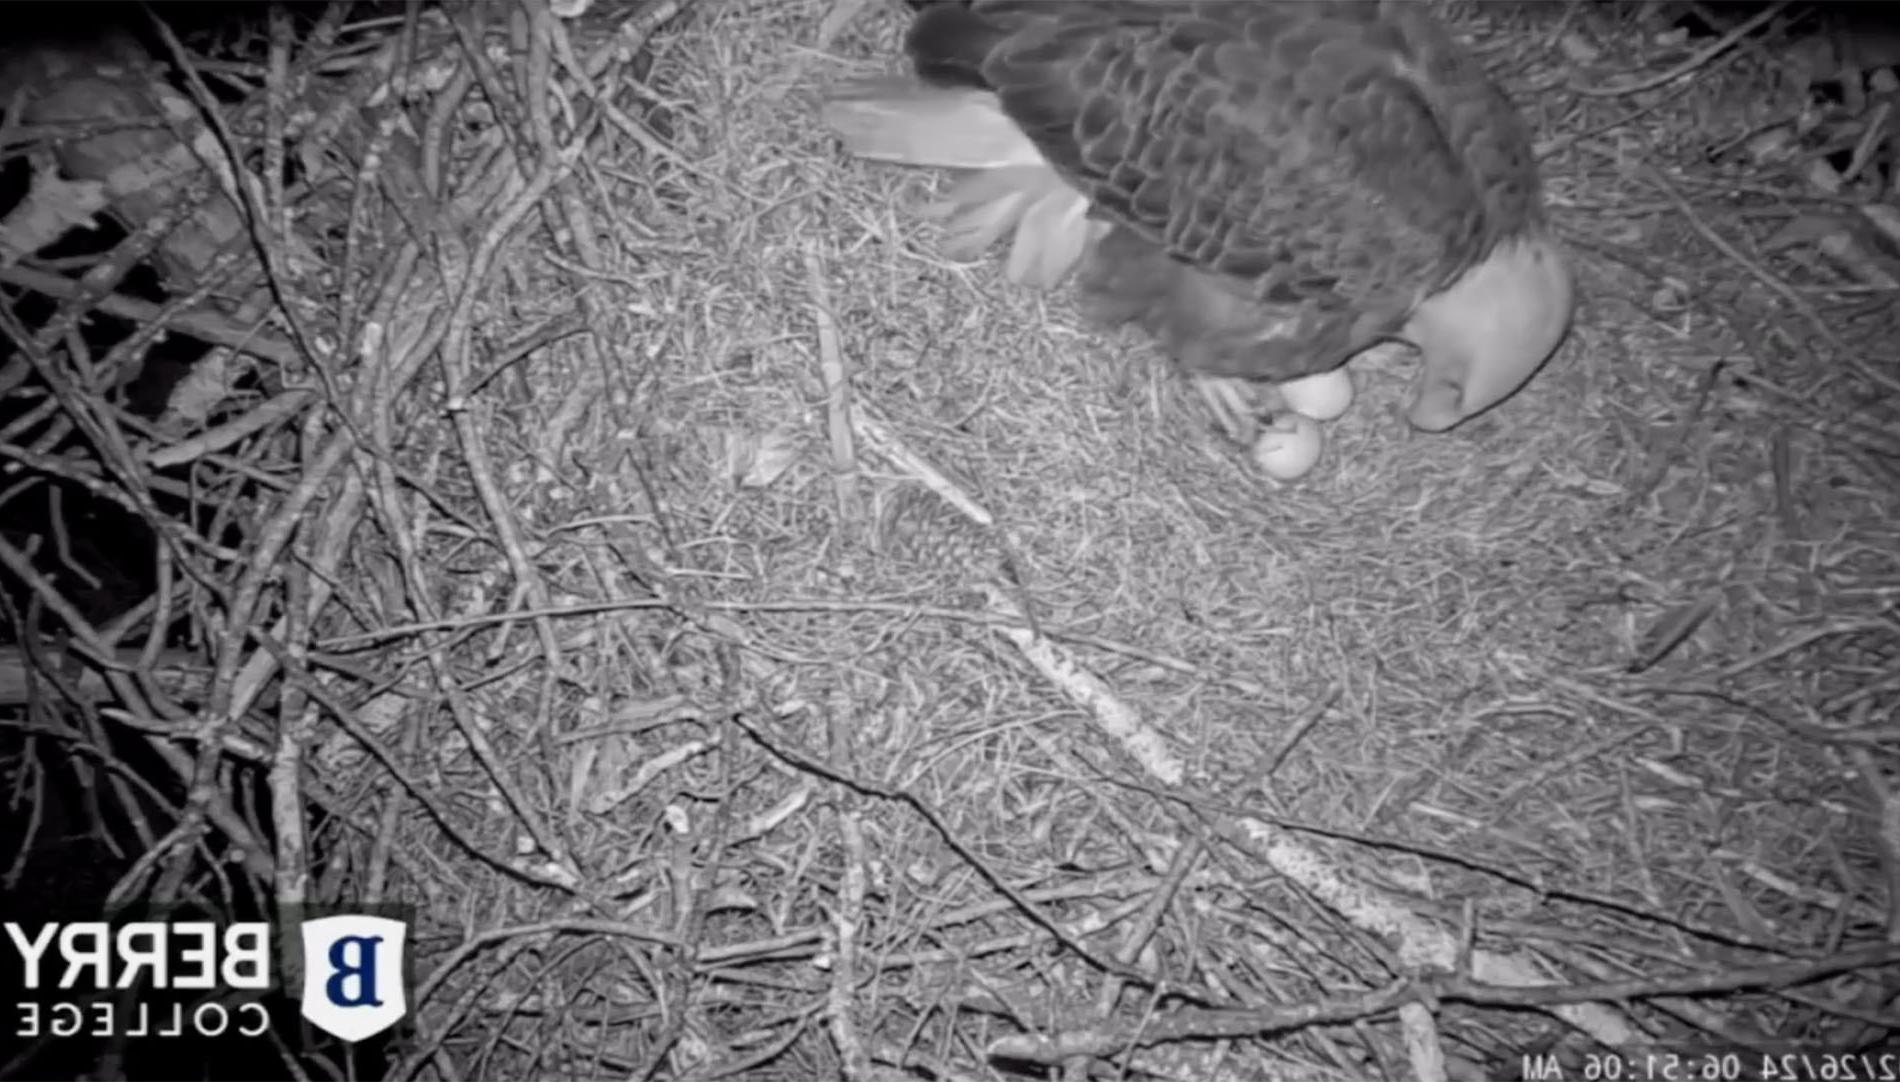 eagle over two eggs in a nest